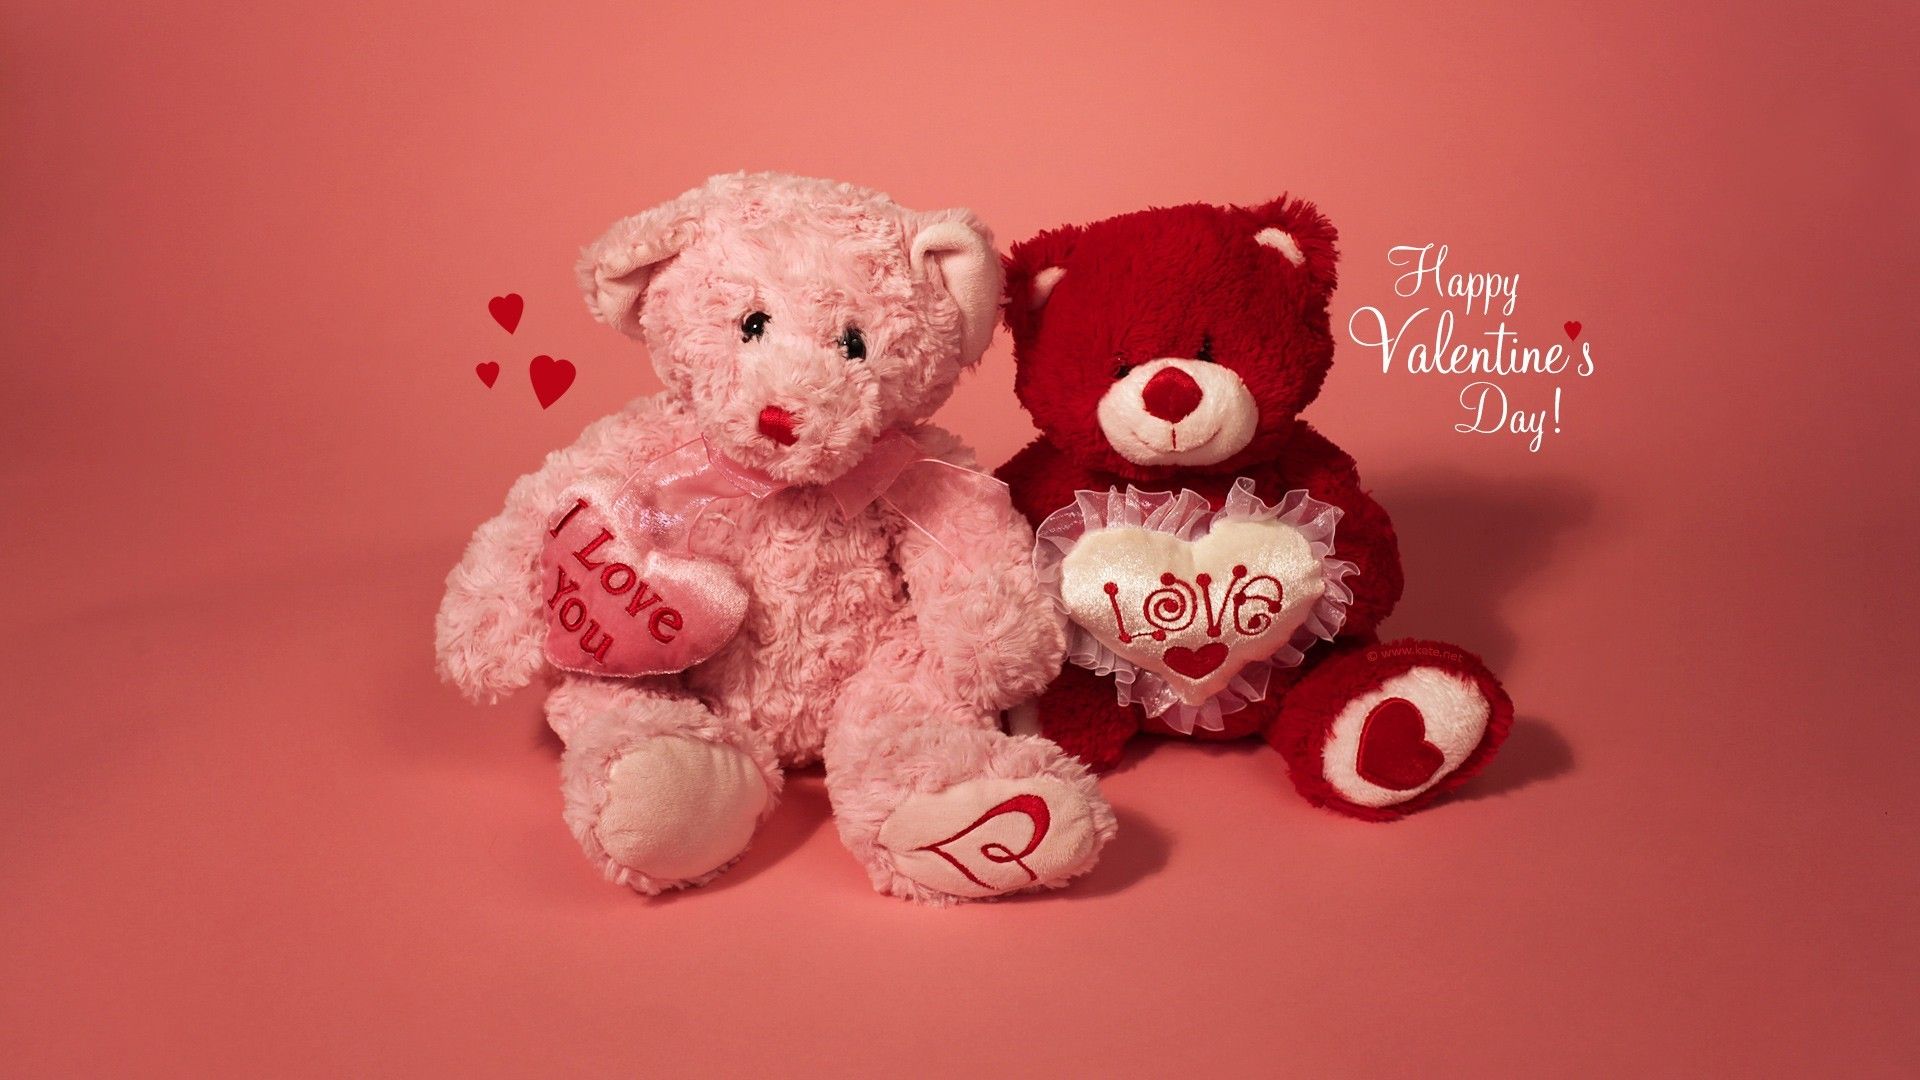  Cute Valentines Day Desktop Wallpapers Download at WallpaperBro